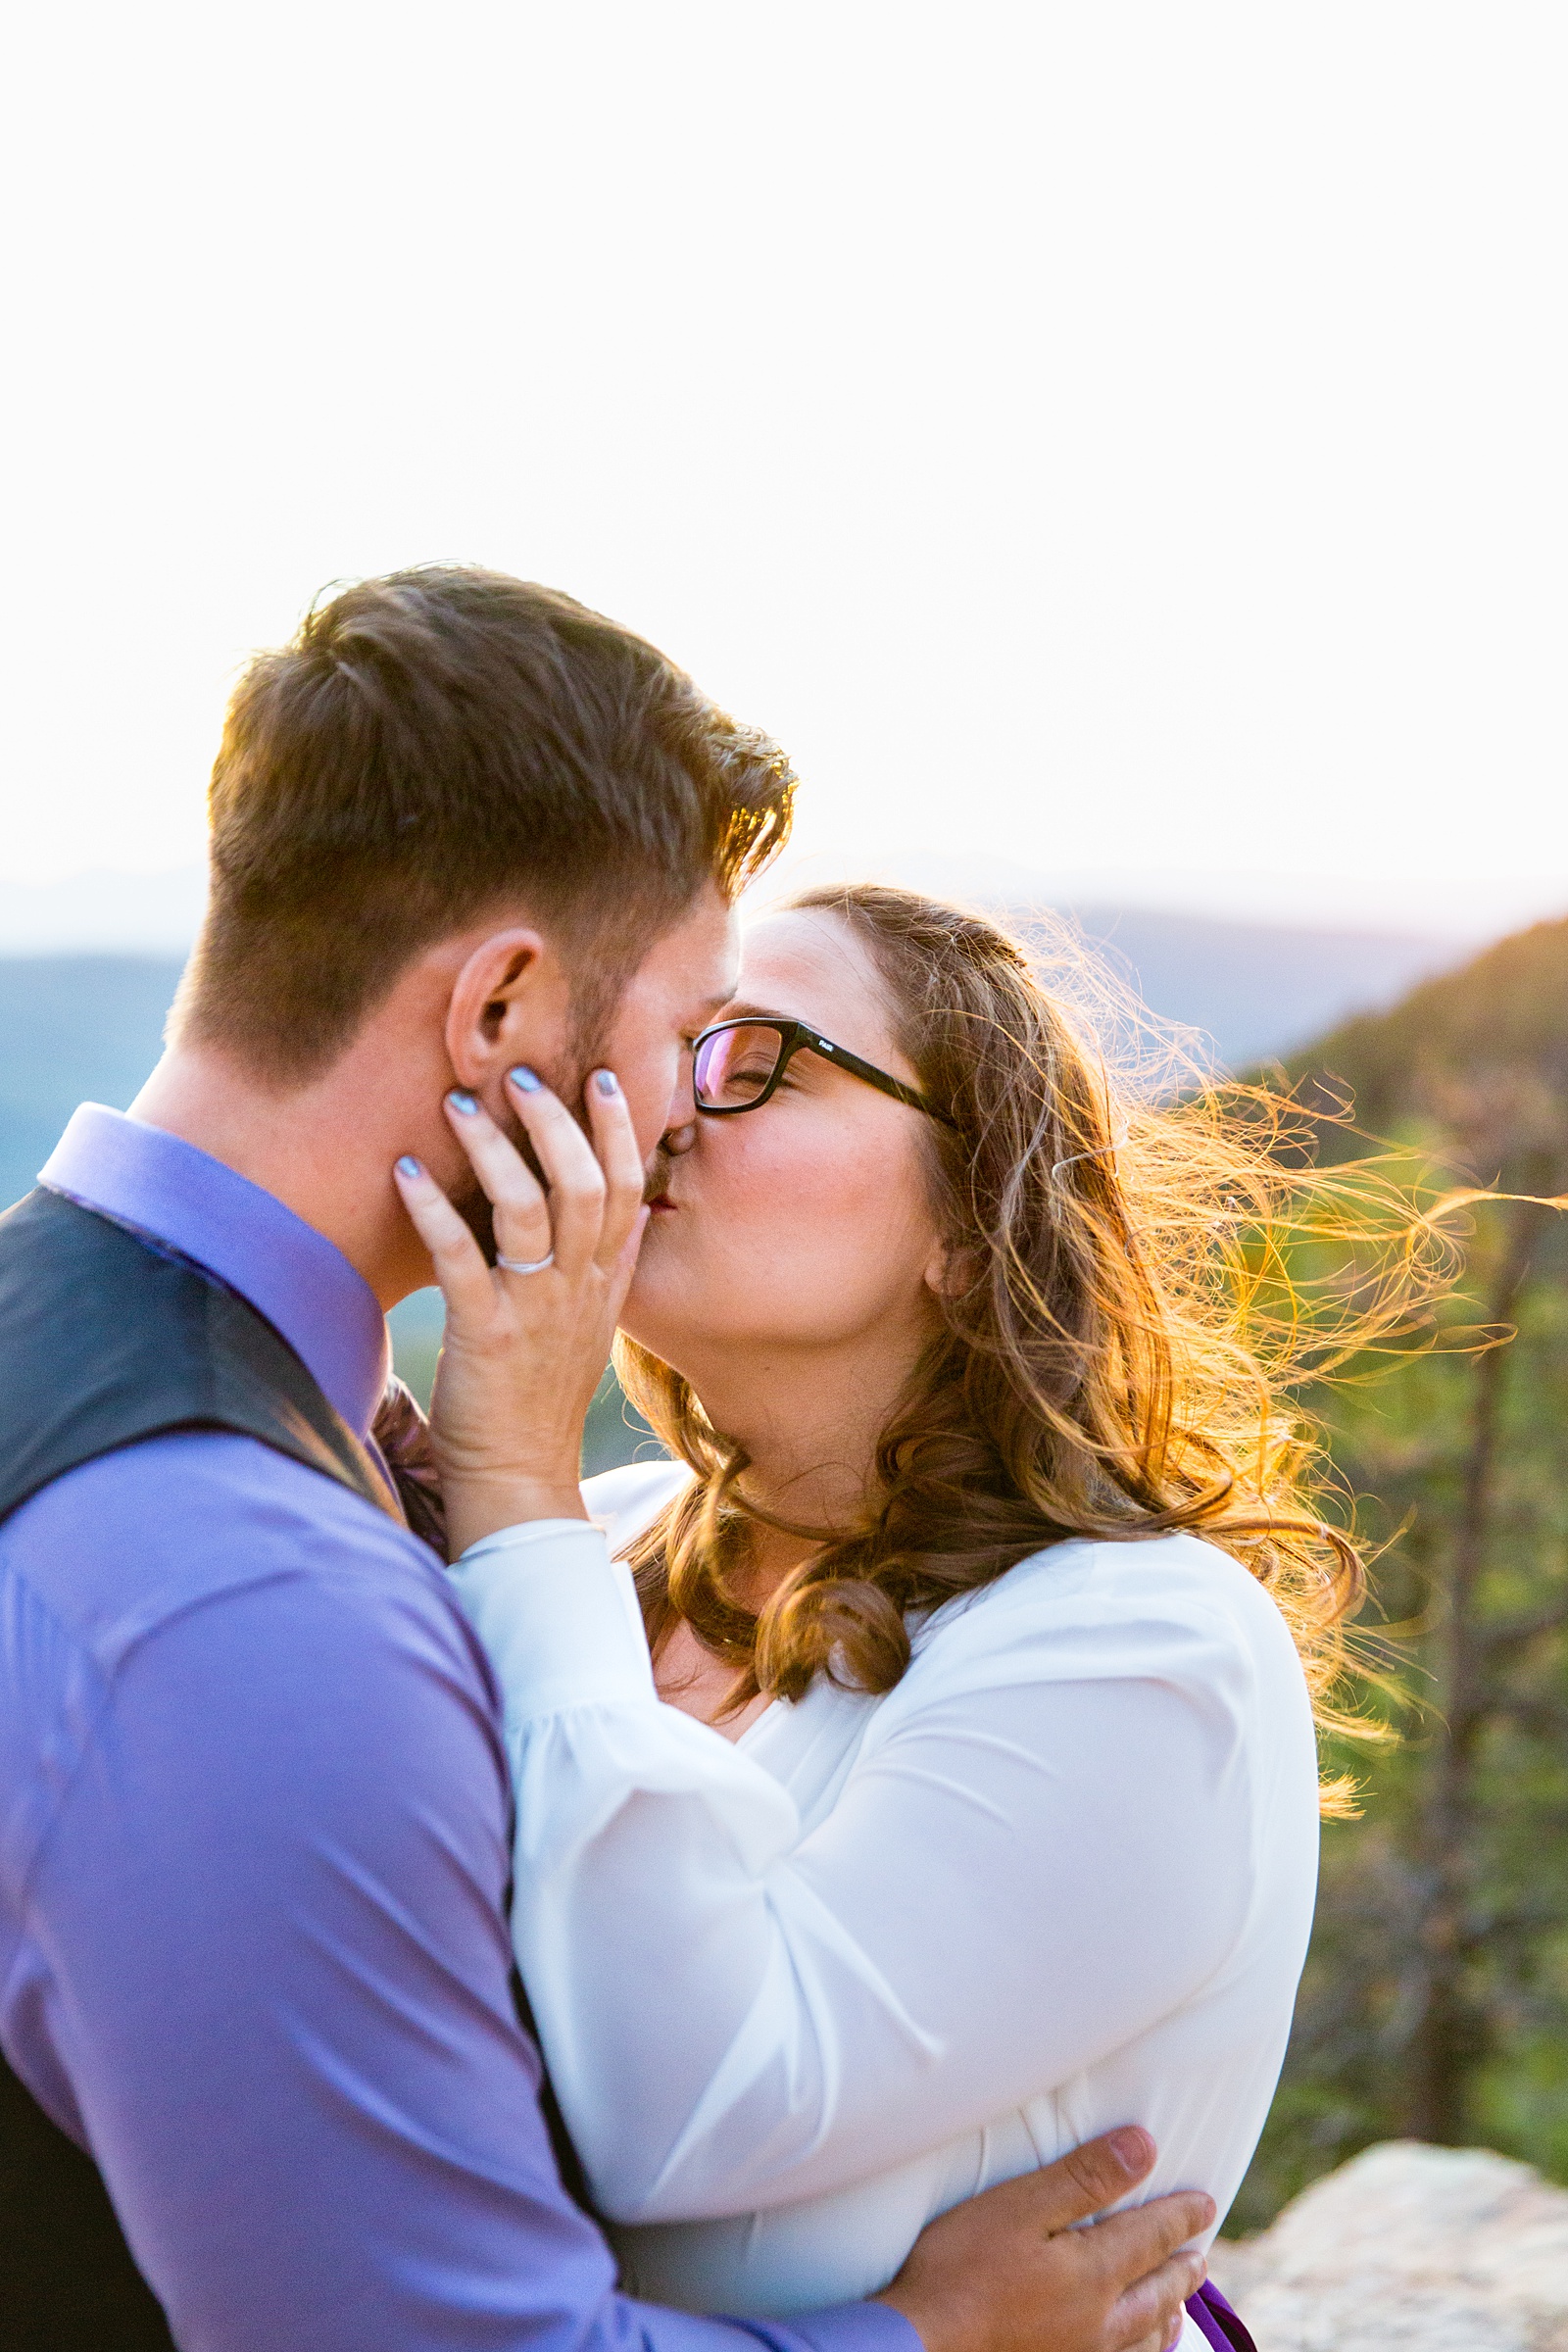 Bride and Groom share a kiss during their Mogollon Rim elopement by Arizona elopement photographer PMA Photography.